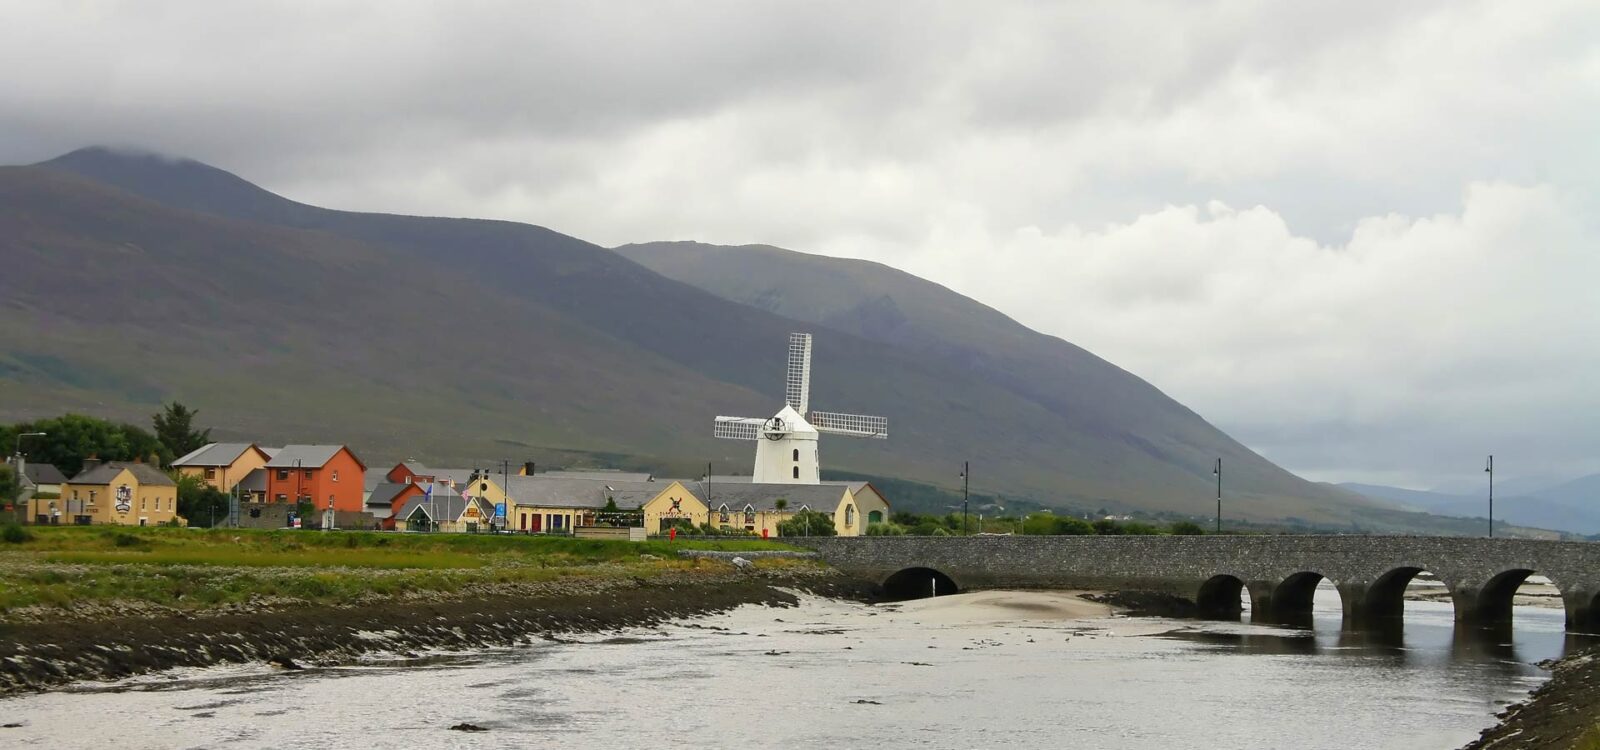 Blennerville windmill on the Tralee to Camp section of the Dingle Way hiking trail, Ireland